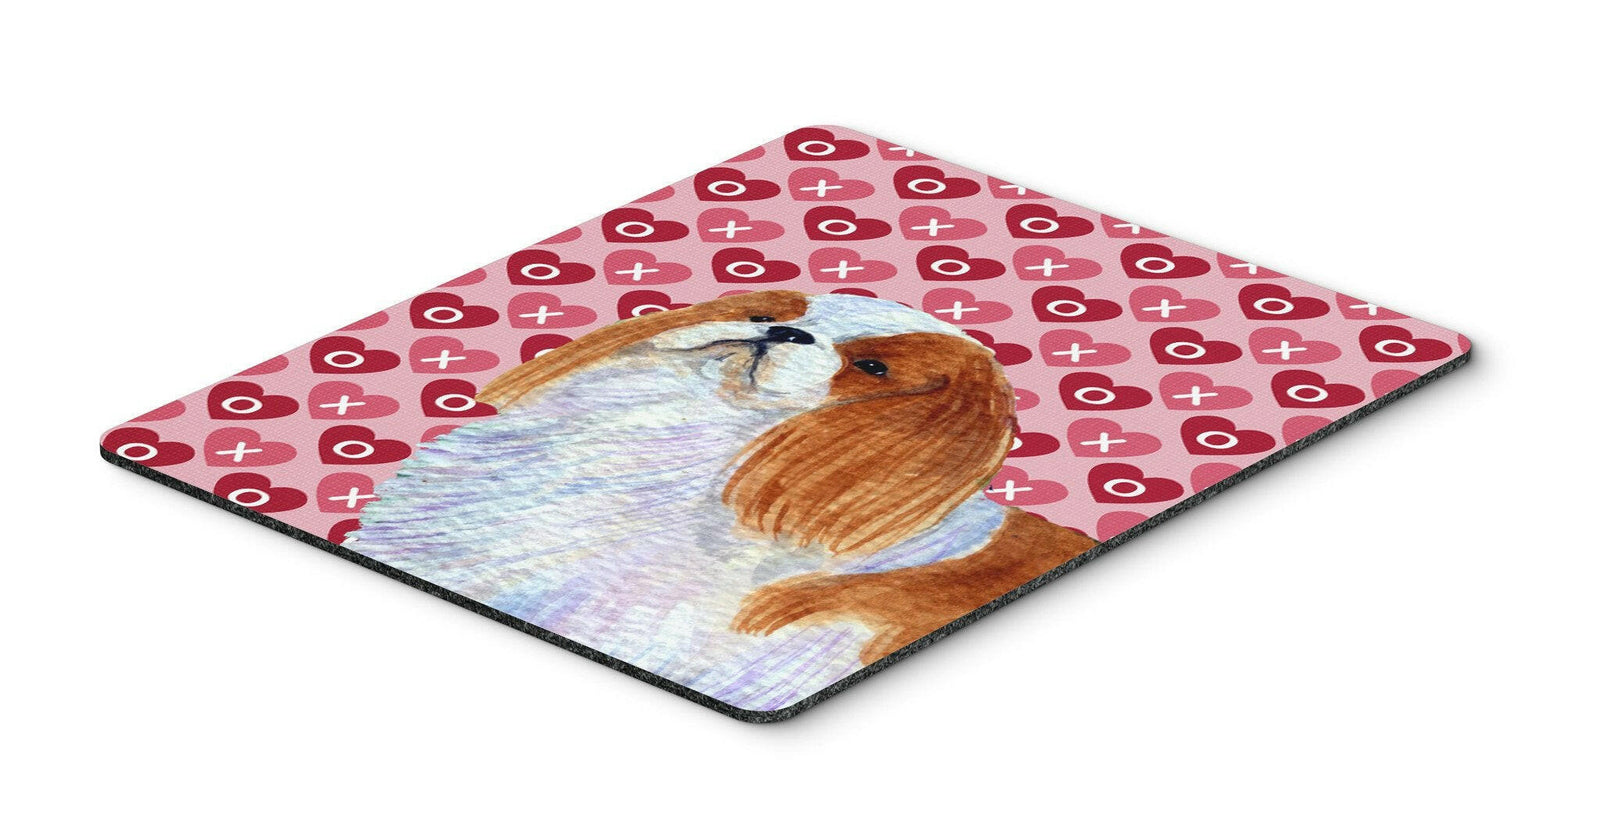 English Toy Spaniel Hearts Love and Valentine's Day Mouse Pad, Hot Pad Trivet by Caroline's Treasures